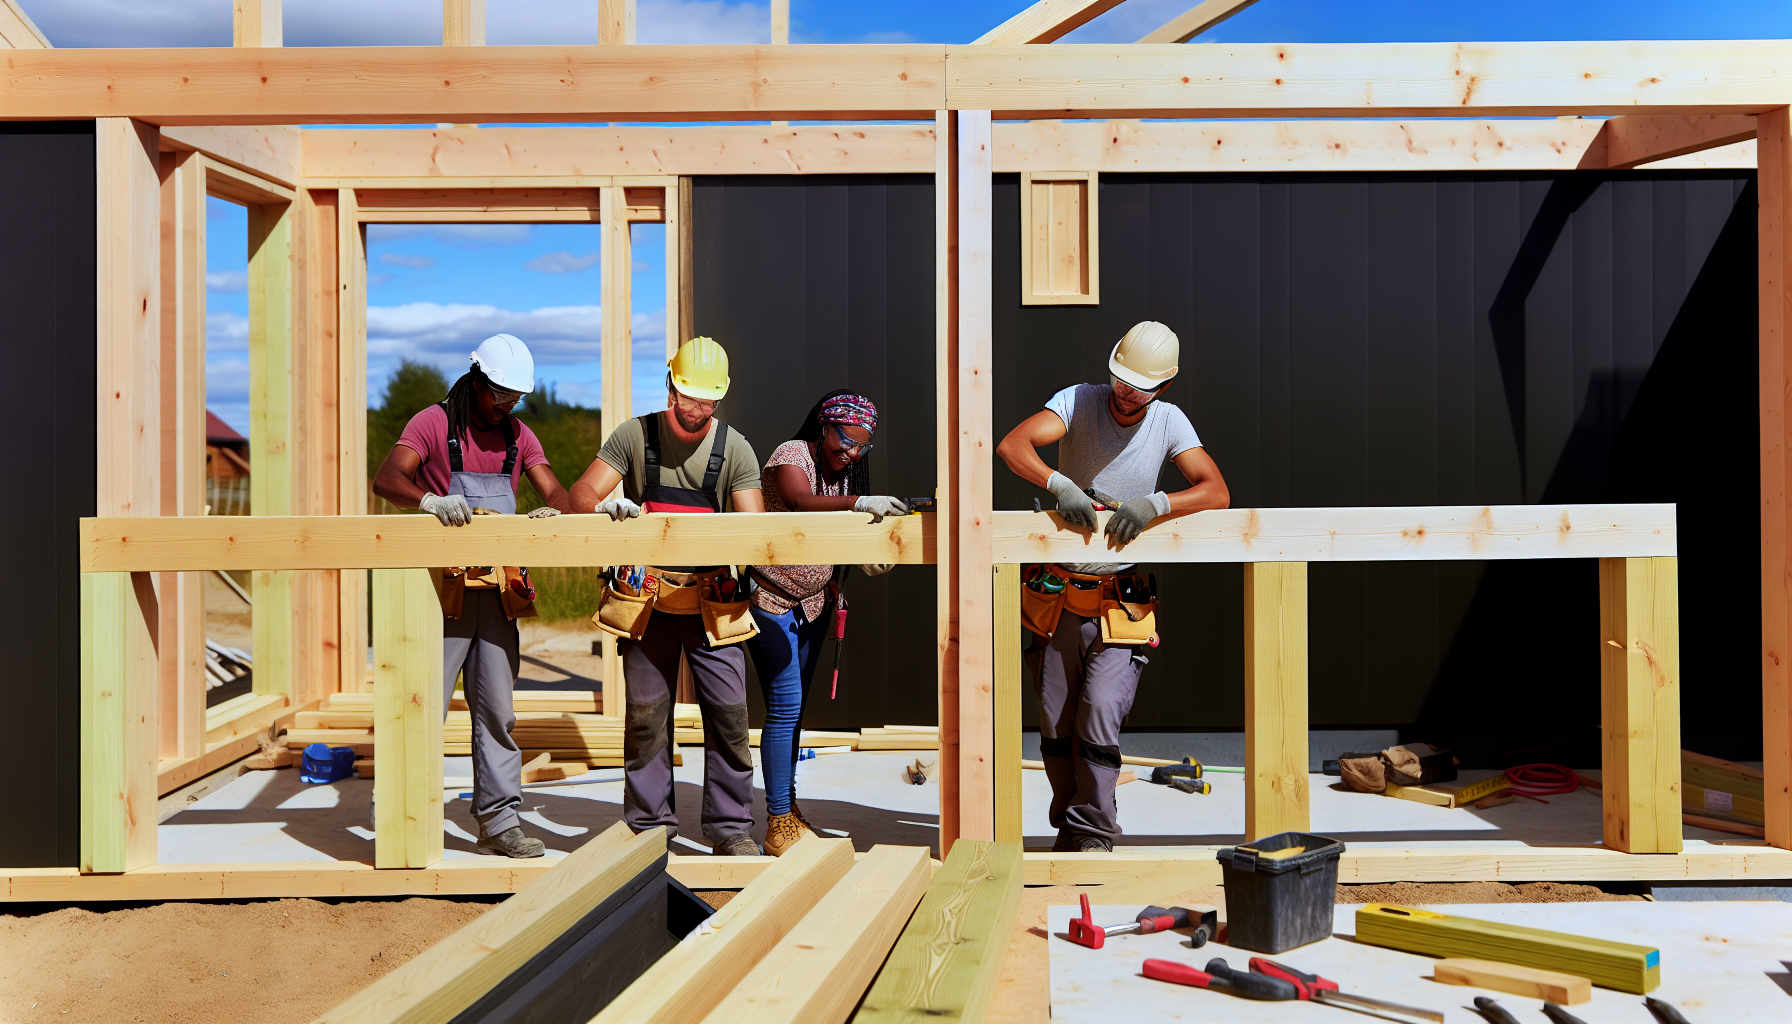 A timber frame extension under construction with workers assembling the frame